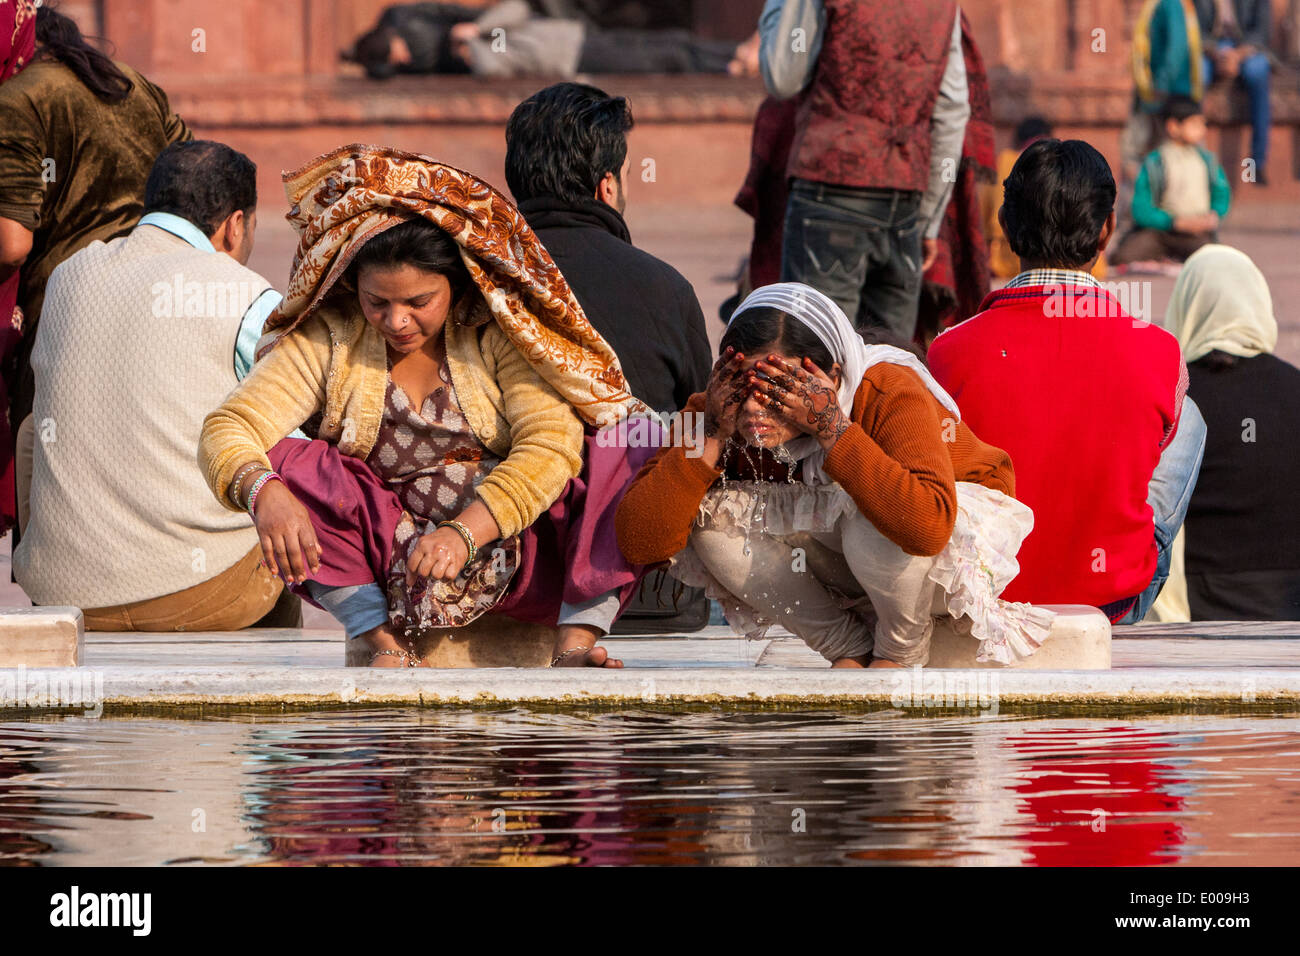 New Delhi, India. Muslim Women Performing Ablutions before Prayers, Jama Masjid (Friday Mosque). Note Henna Tattoos on Hands. Stock Photo